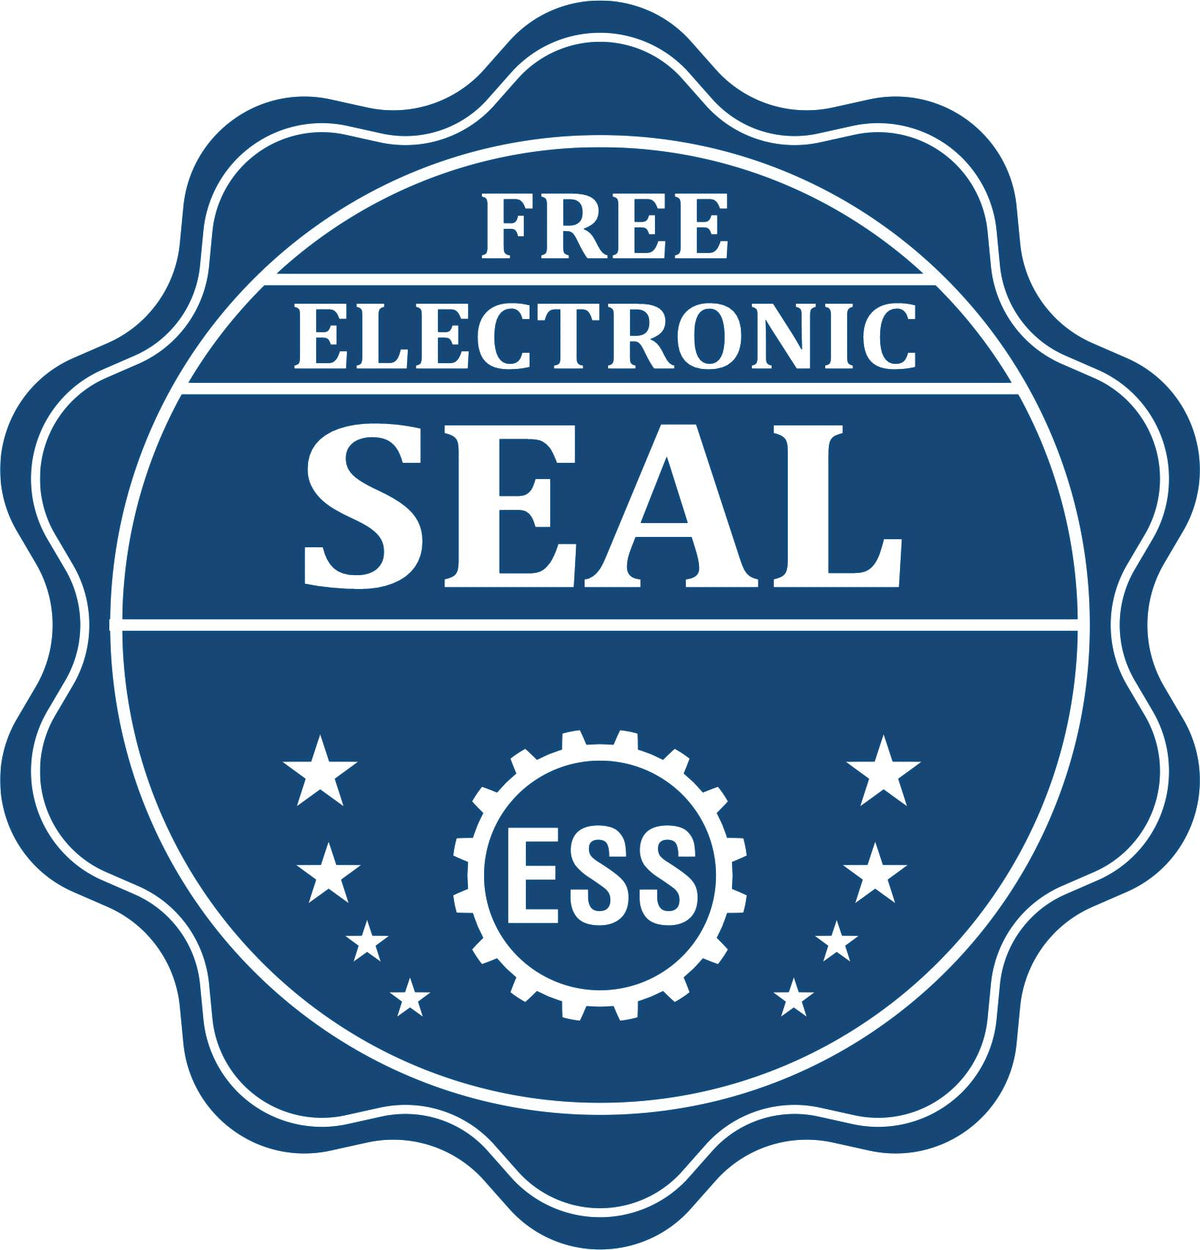 A badge showing a free electronic seal for the Super Slim New Jersey Notary Public Stamp with stars and the ESS gear on the emblem.